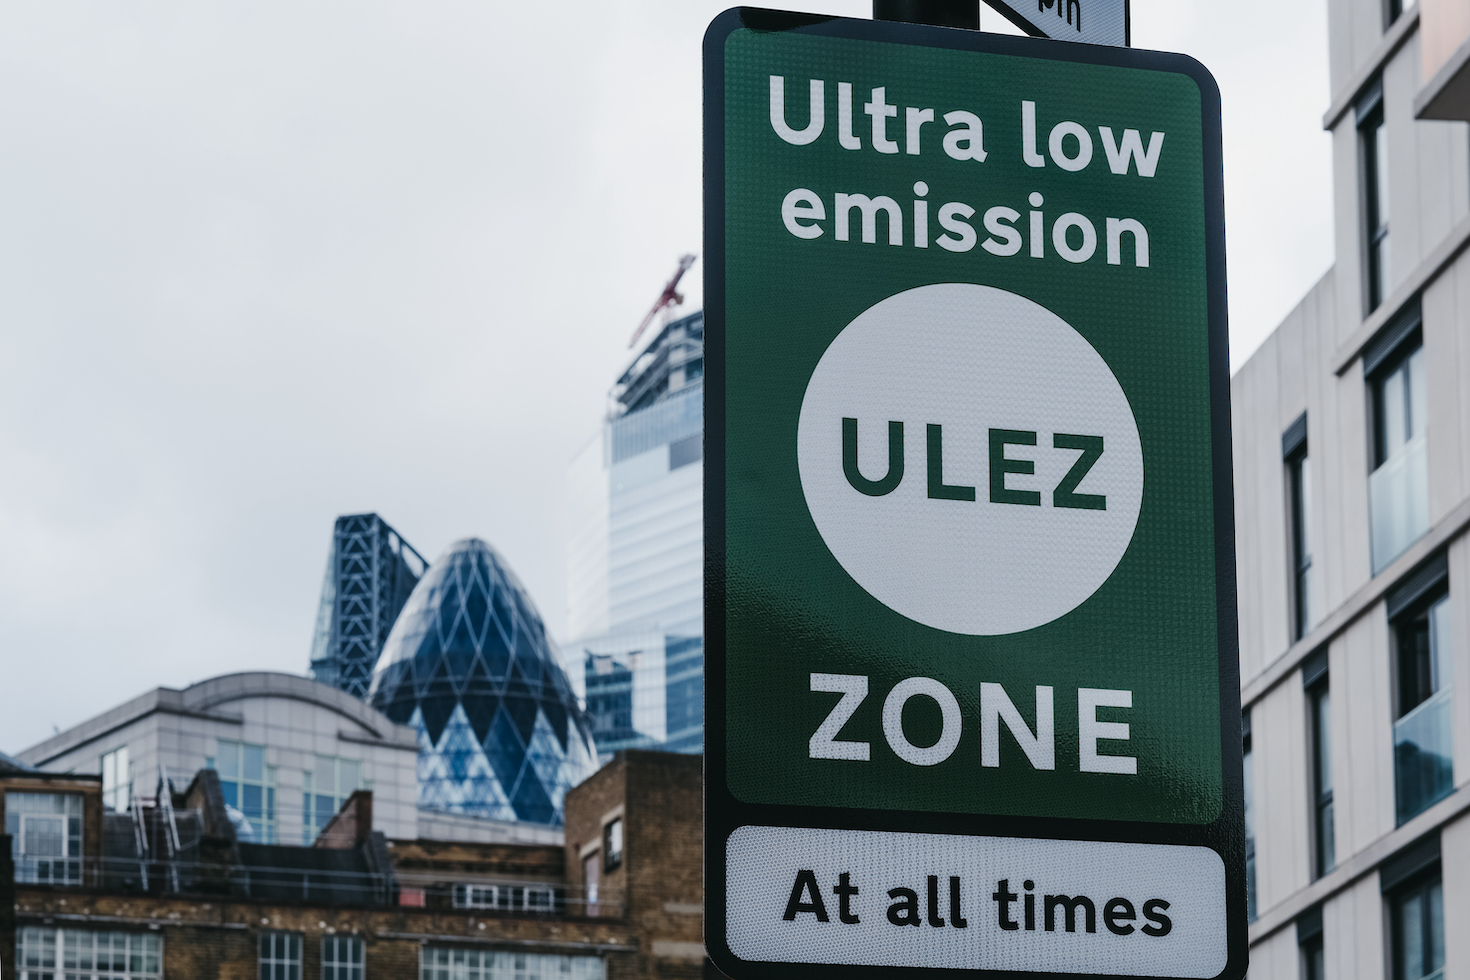 Ultra low emissions zone signage